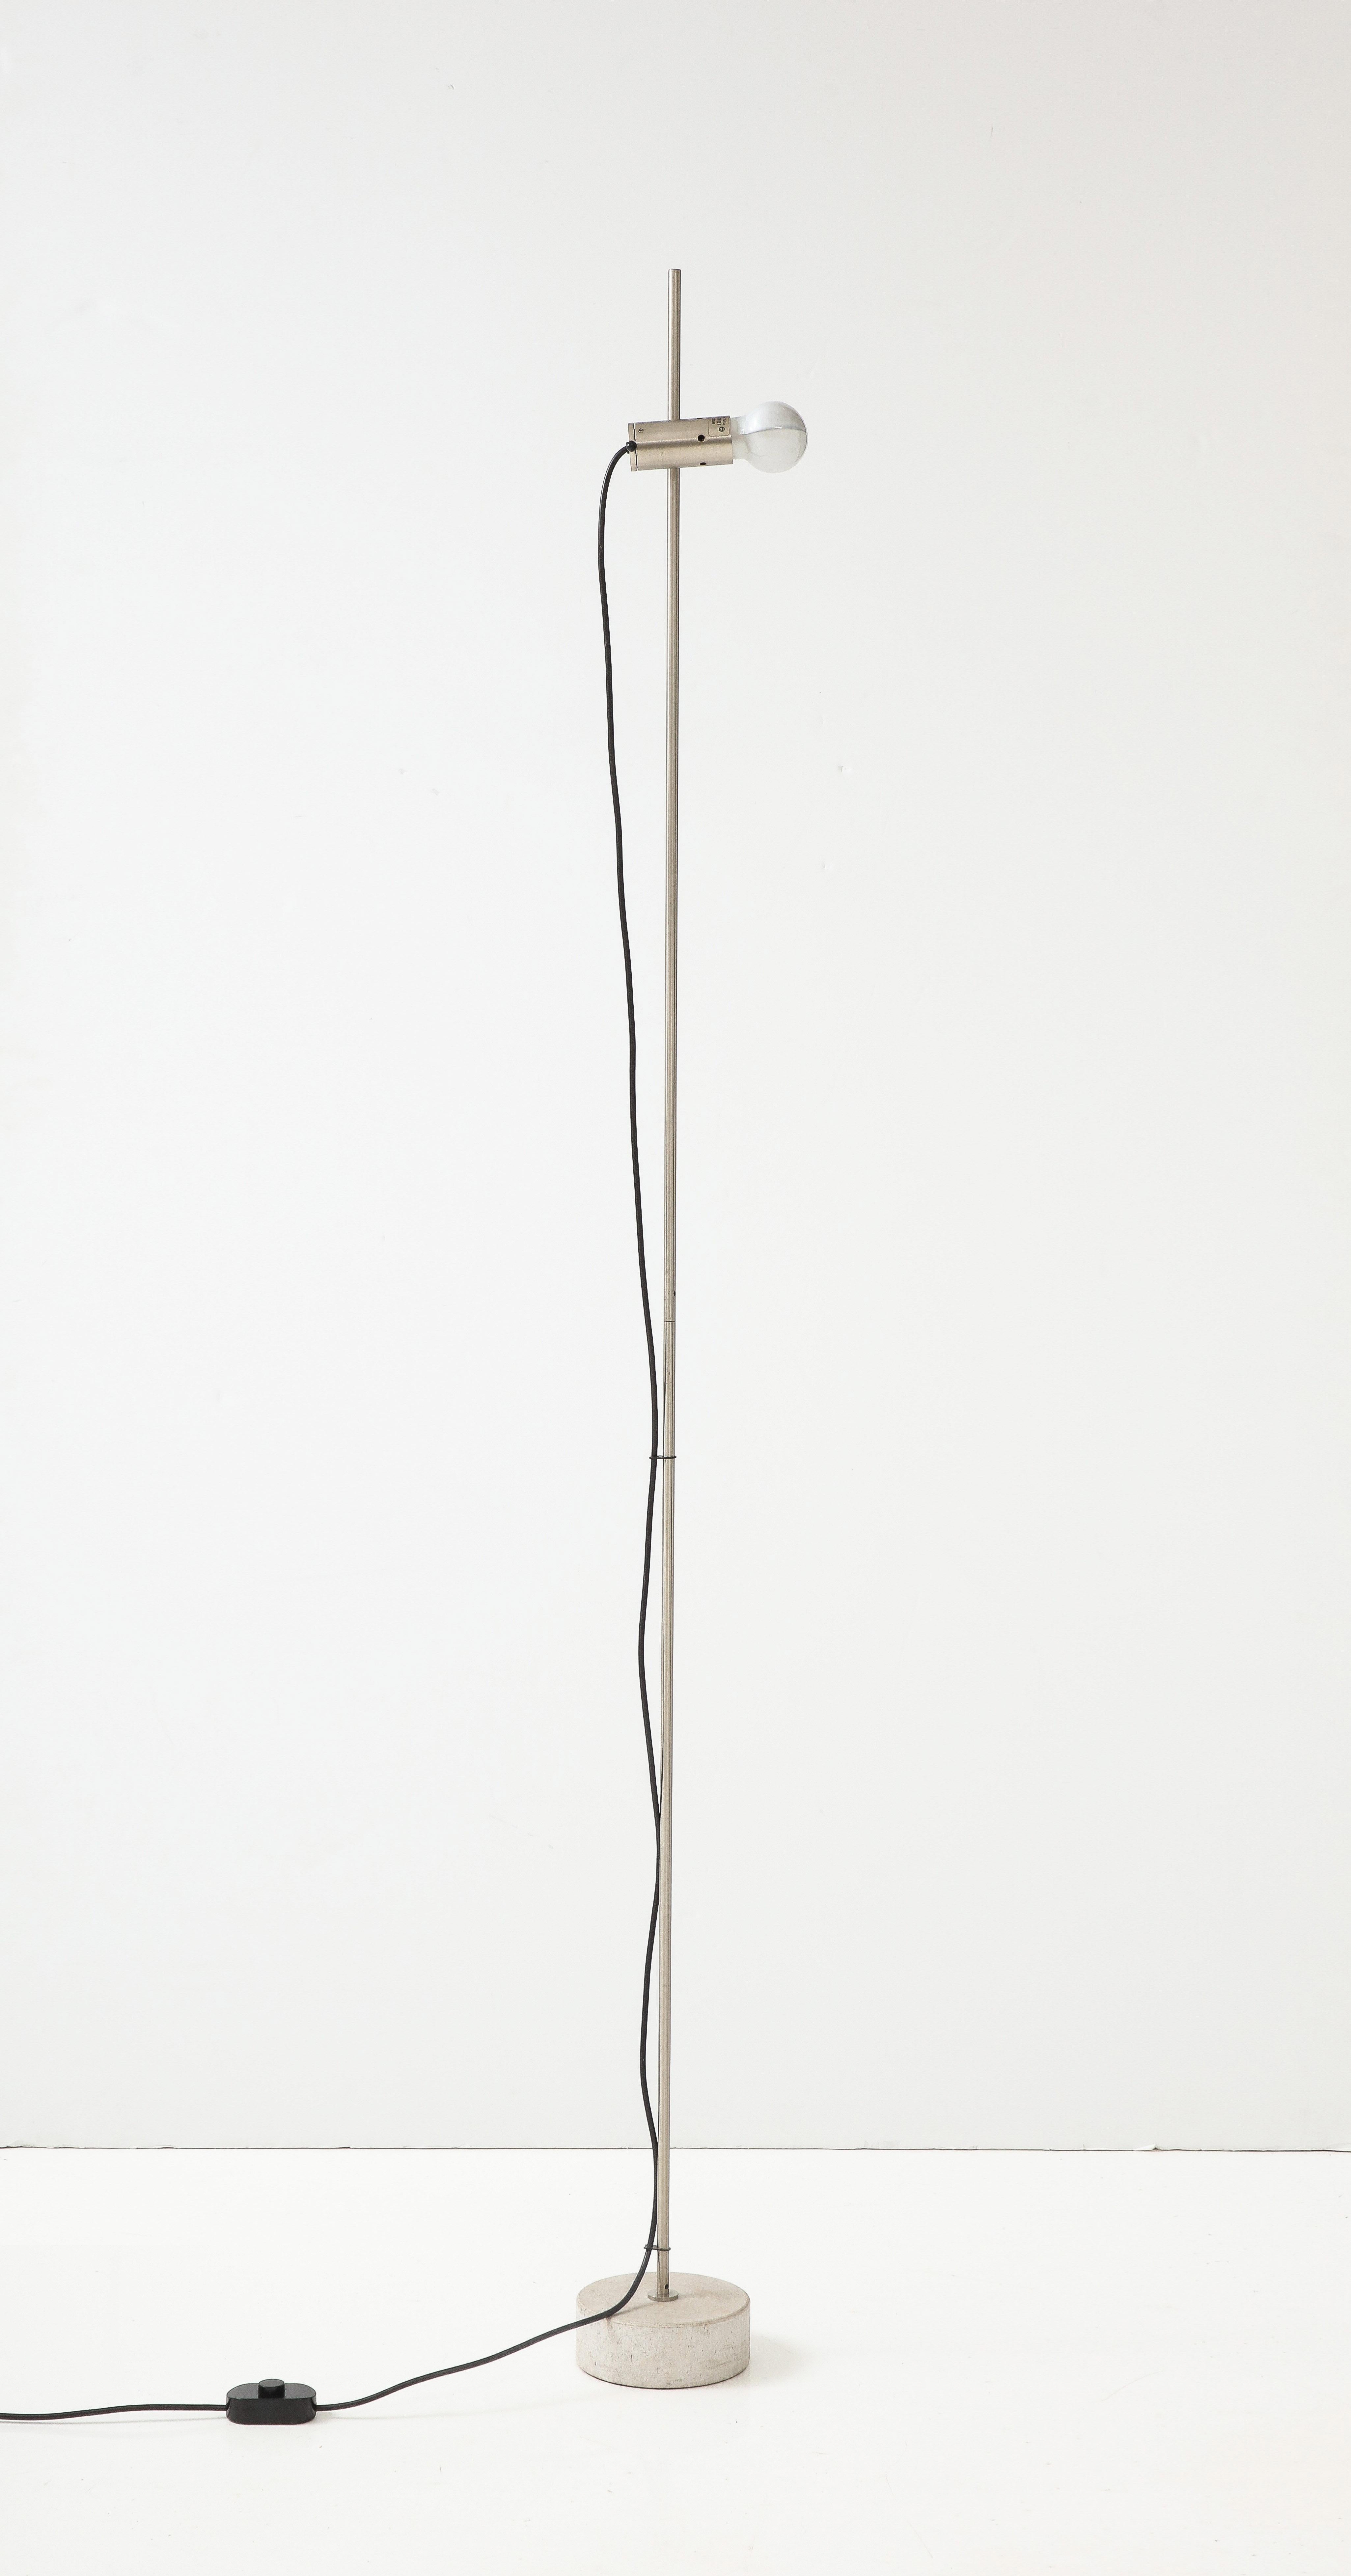 Italian design icon from the 1960s : a minimalist floor lamp by Tito Agnoli for Oluce. It features a concrete base and a stainless steel pole on which the socket can be multi dimensionally adjusted. The socket unit features a stainless steel